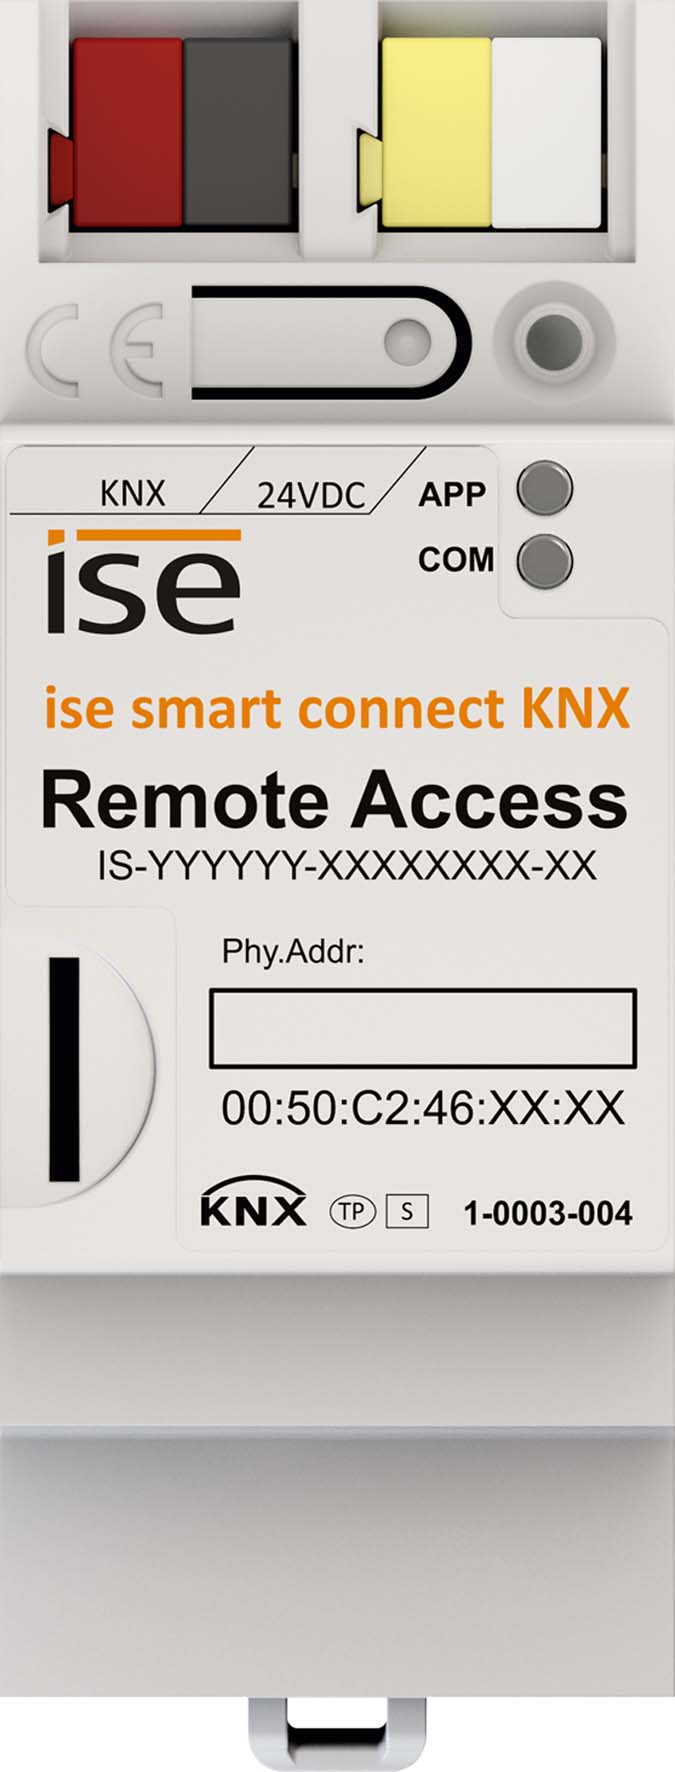 ise Software+Elekt. SMART CONNECT KNX REMOTE ACCESS 1-0003-004